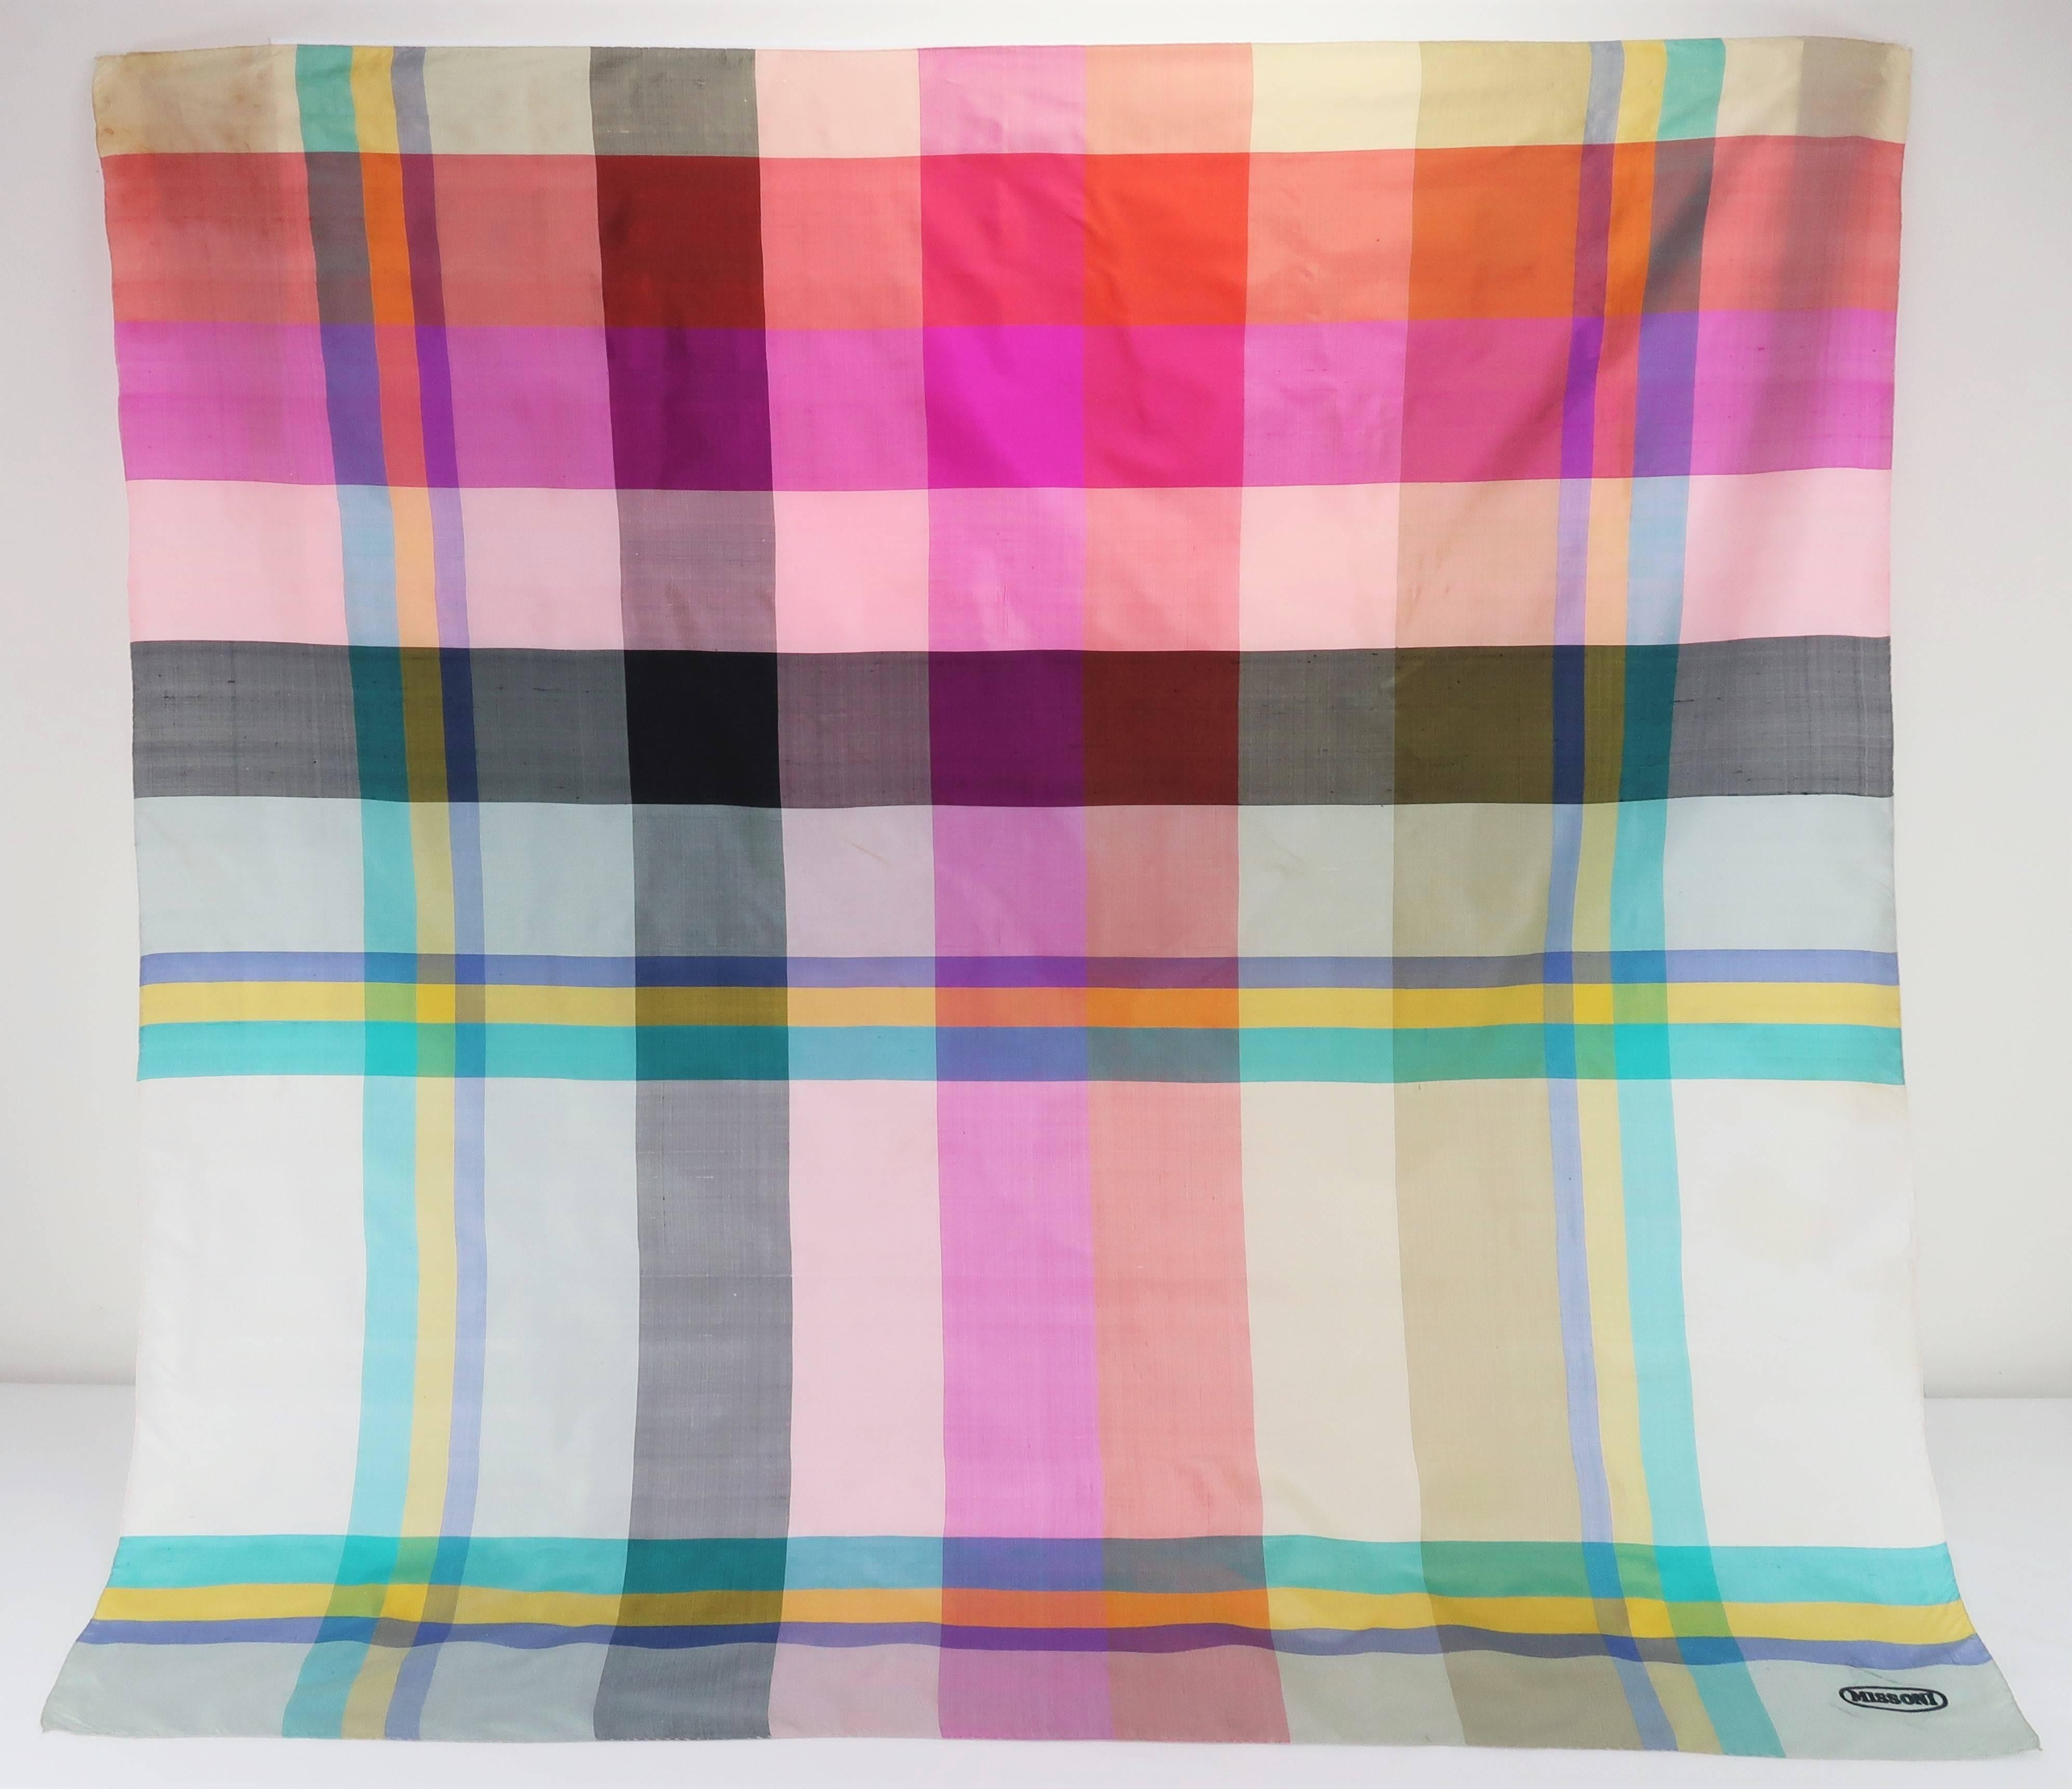 The brilliance of exotic jewel tone colors is present in every square inch of this Missoni raw silk scarf wrap.  The look is a bit of a departure for the famous Italian fashion house though the colors and quality of the fabric certainly fit the